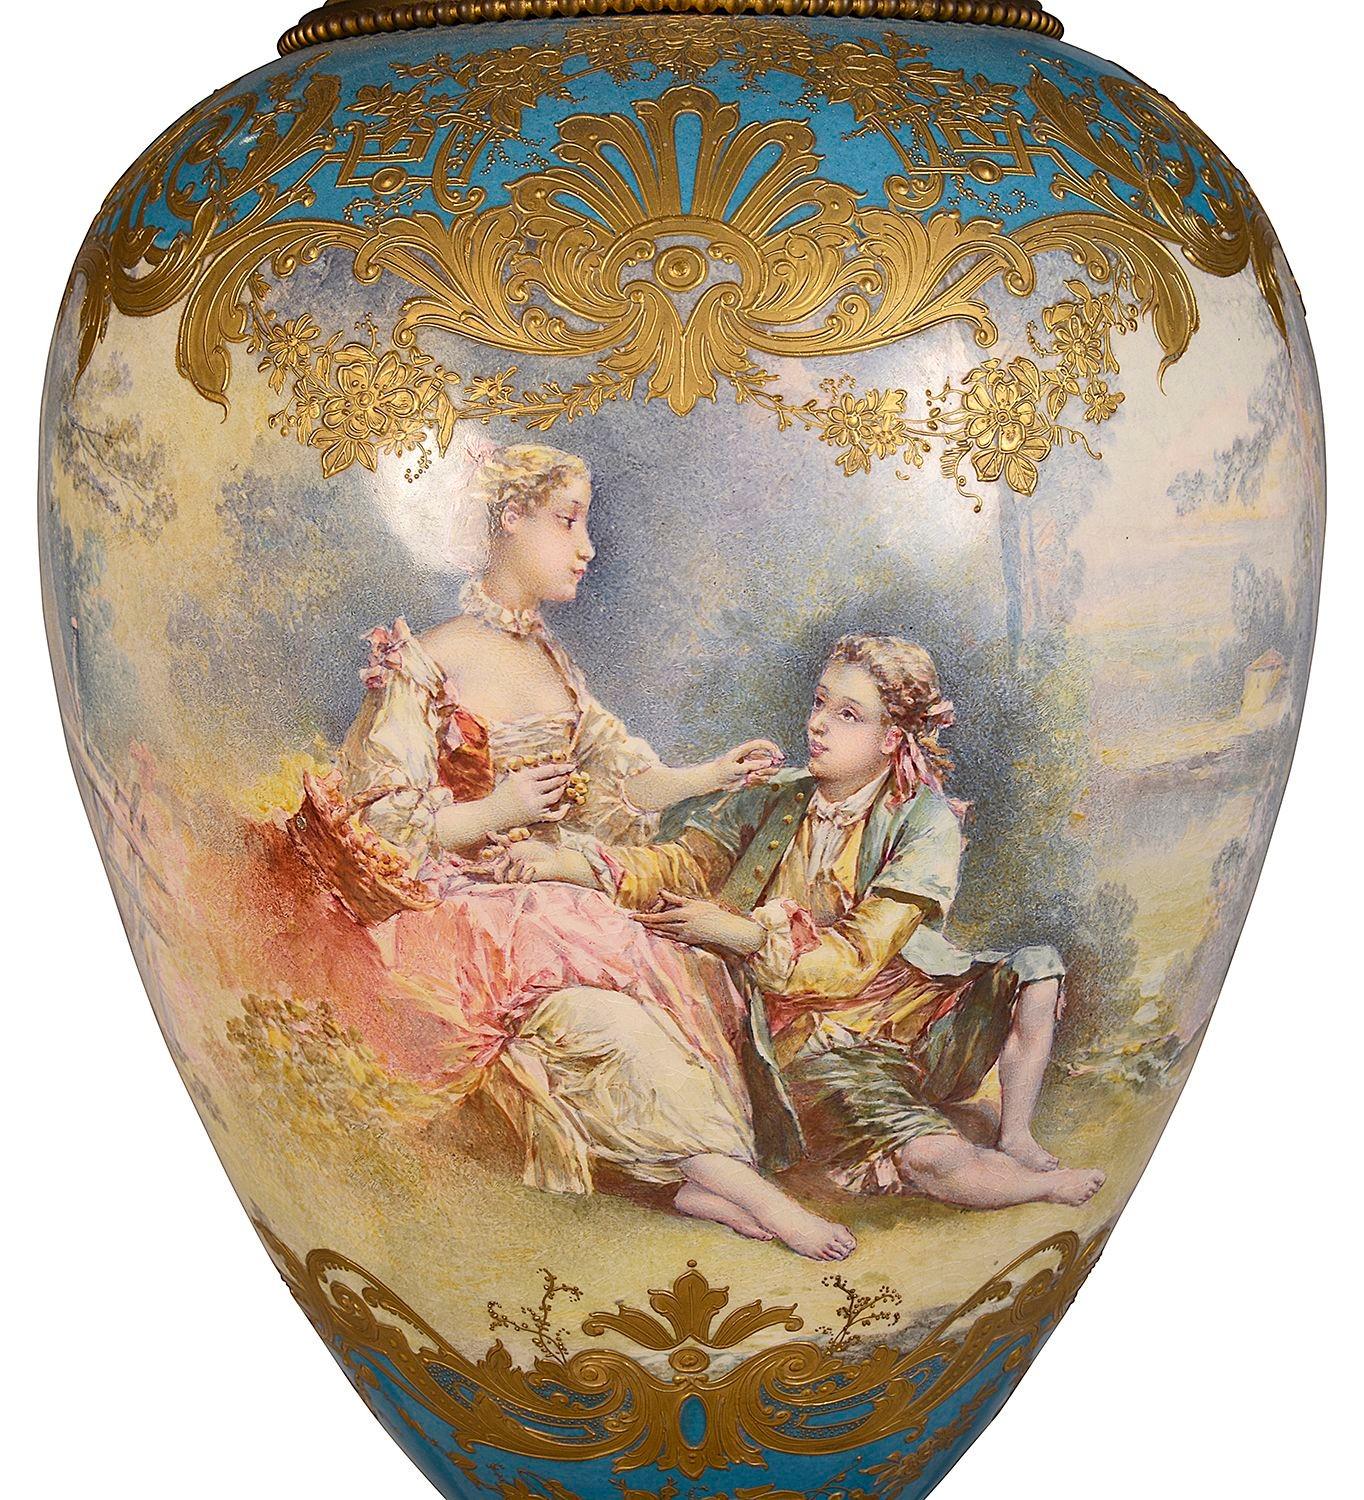 A very good quality late 19th Century French Sevres style porcelain lidded vase. Having a turquoise ground, wonderful scrolling gilded decoration, an inset hand painted romantic scene of seated lovers. Mounted with gilded ormolu mounts, a plinth